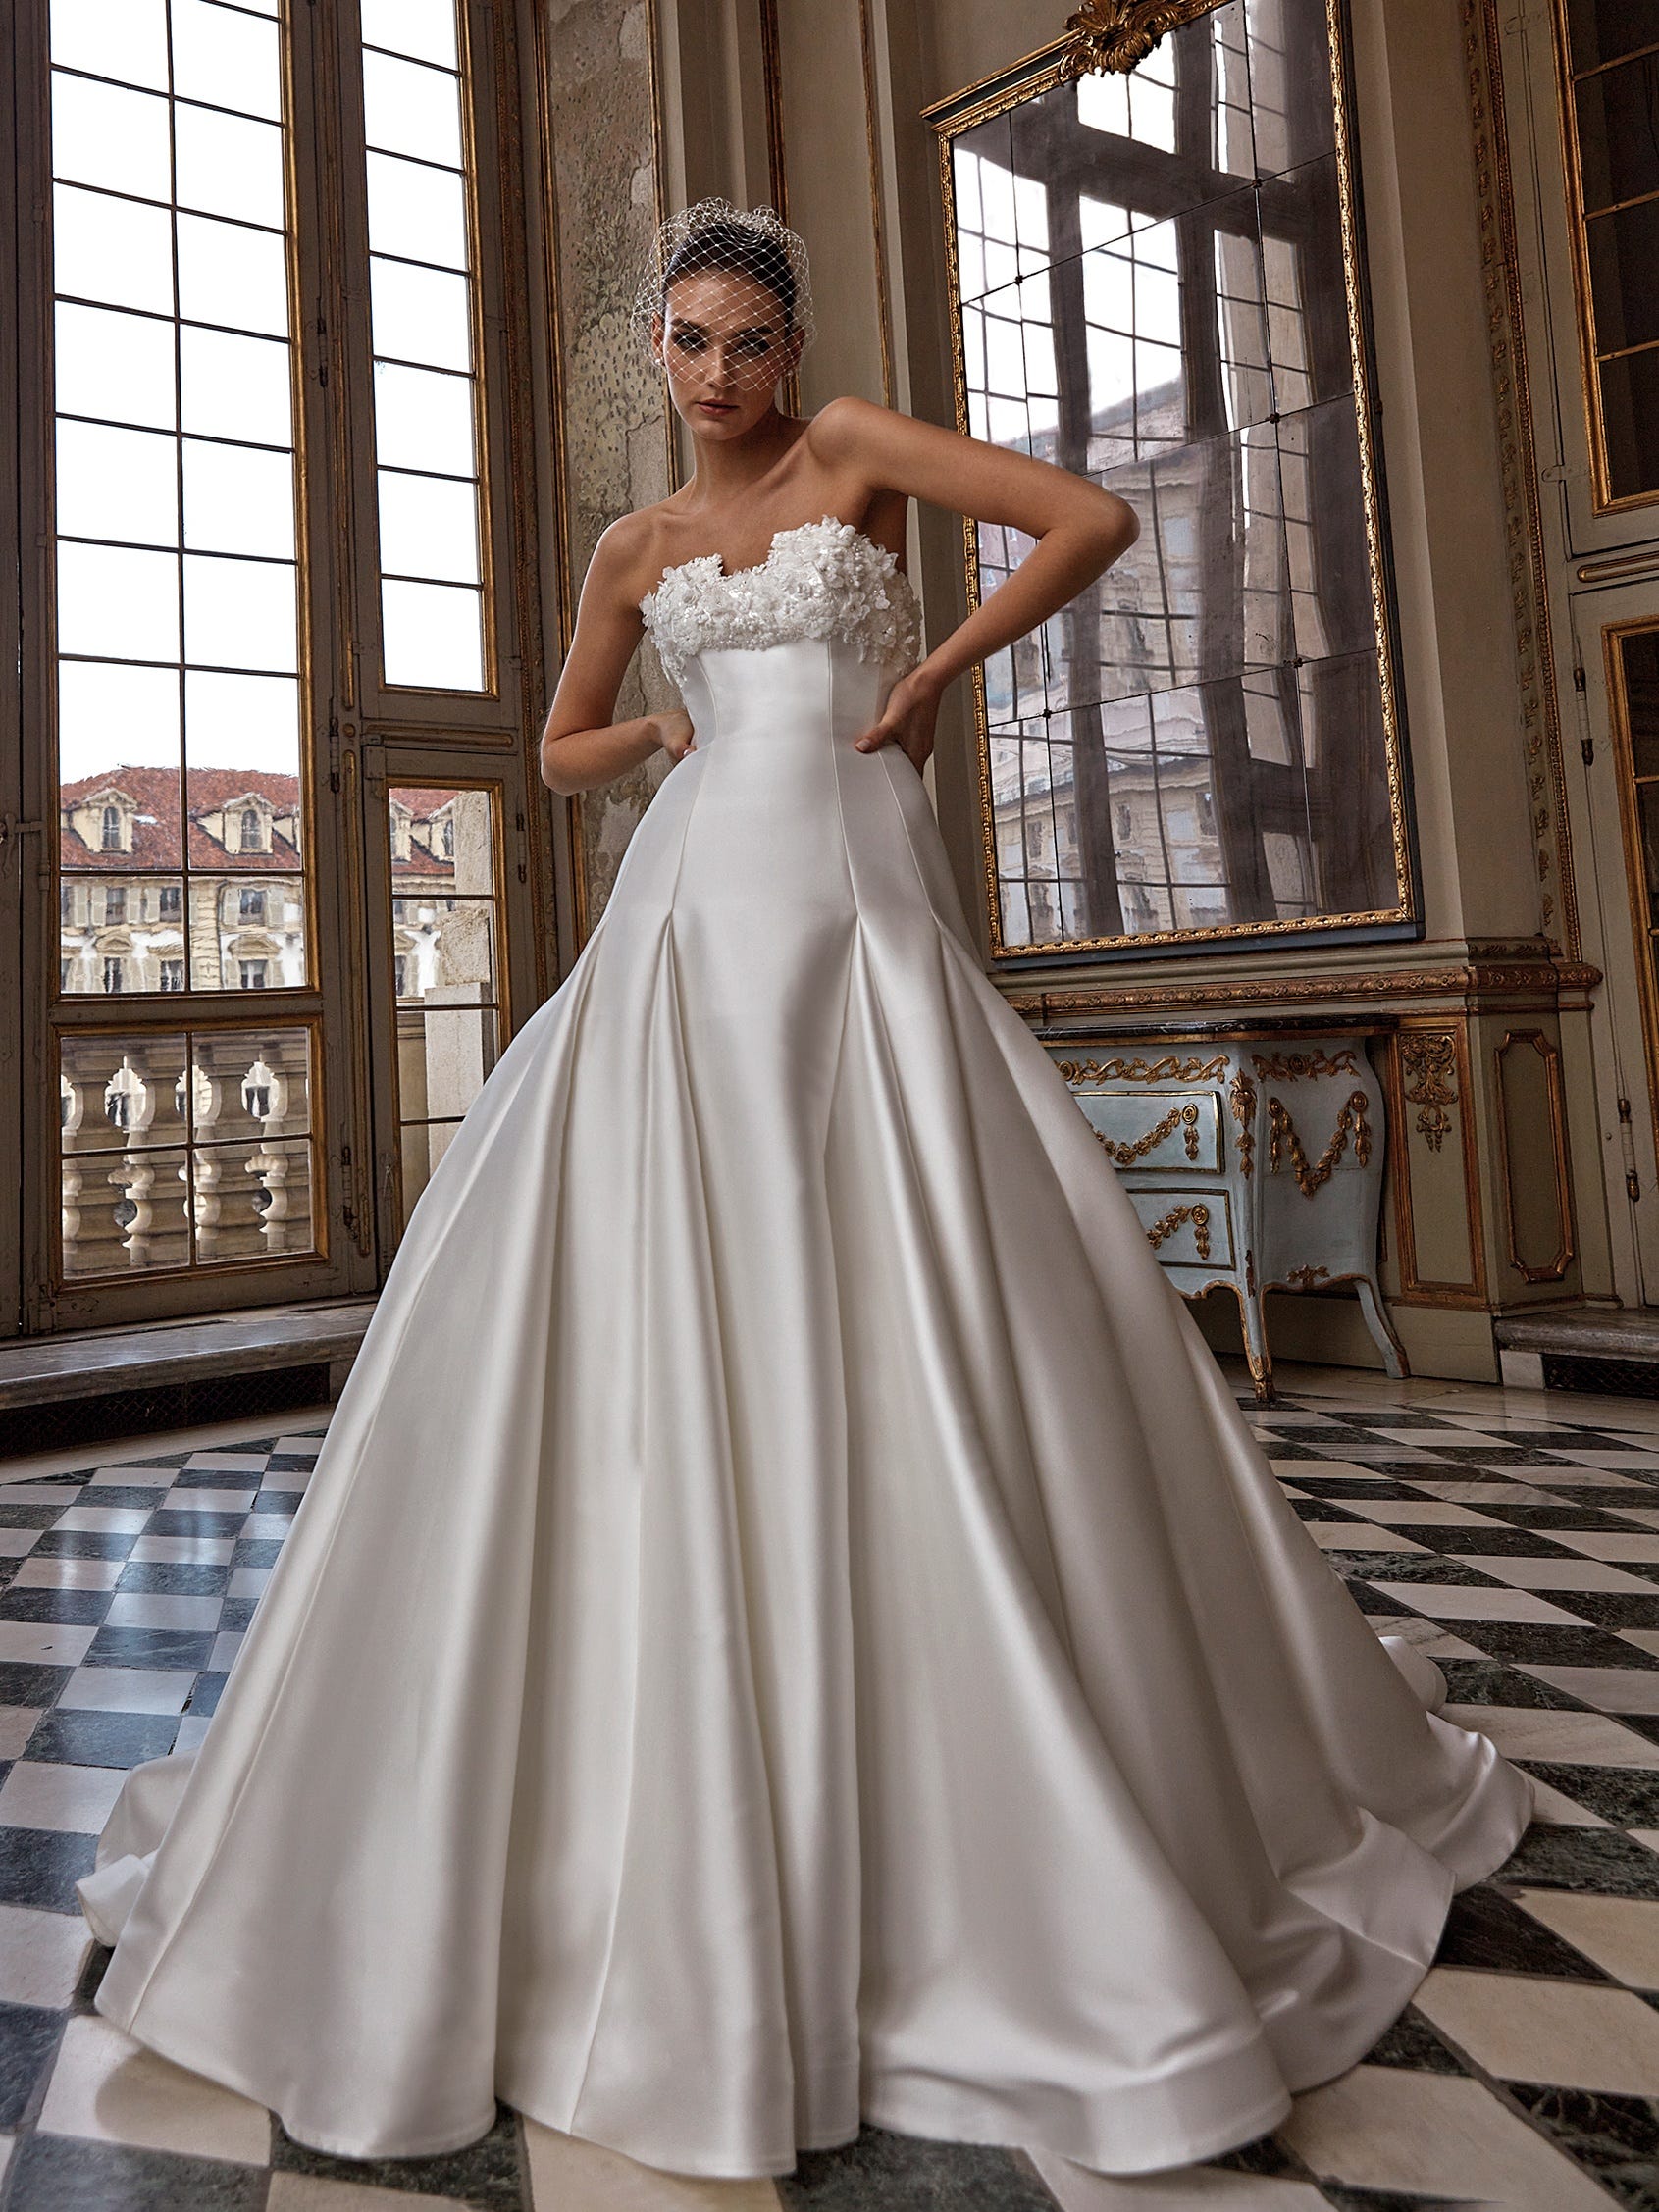 Presenting the new Vera Wang Bride 2024 Collection from Pronovias -  Collections - Bridal Buyer